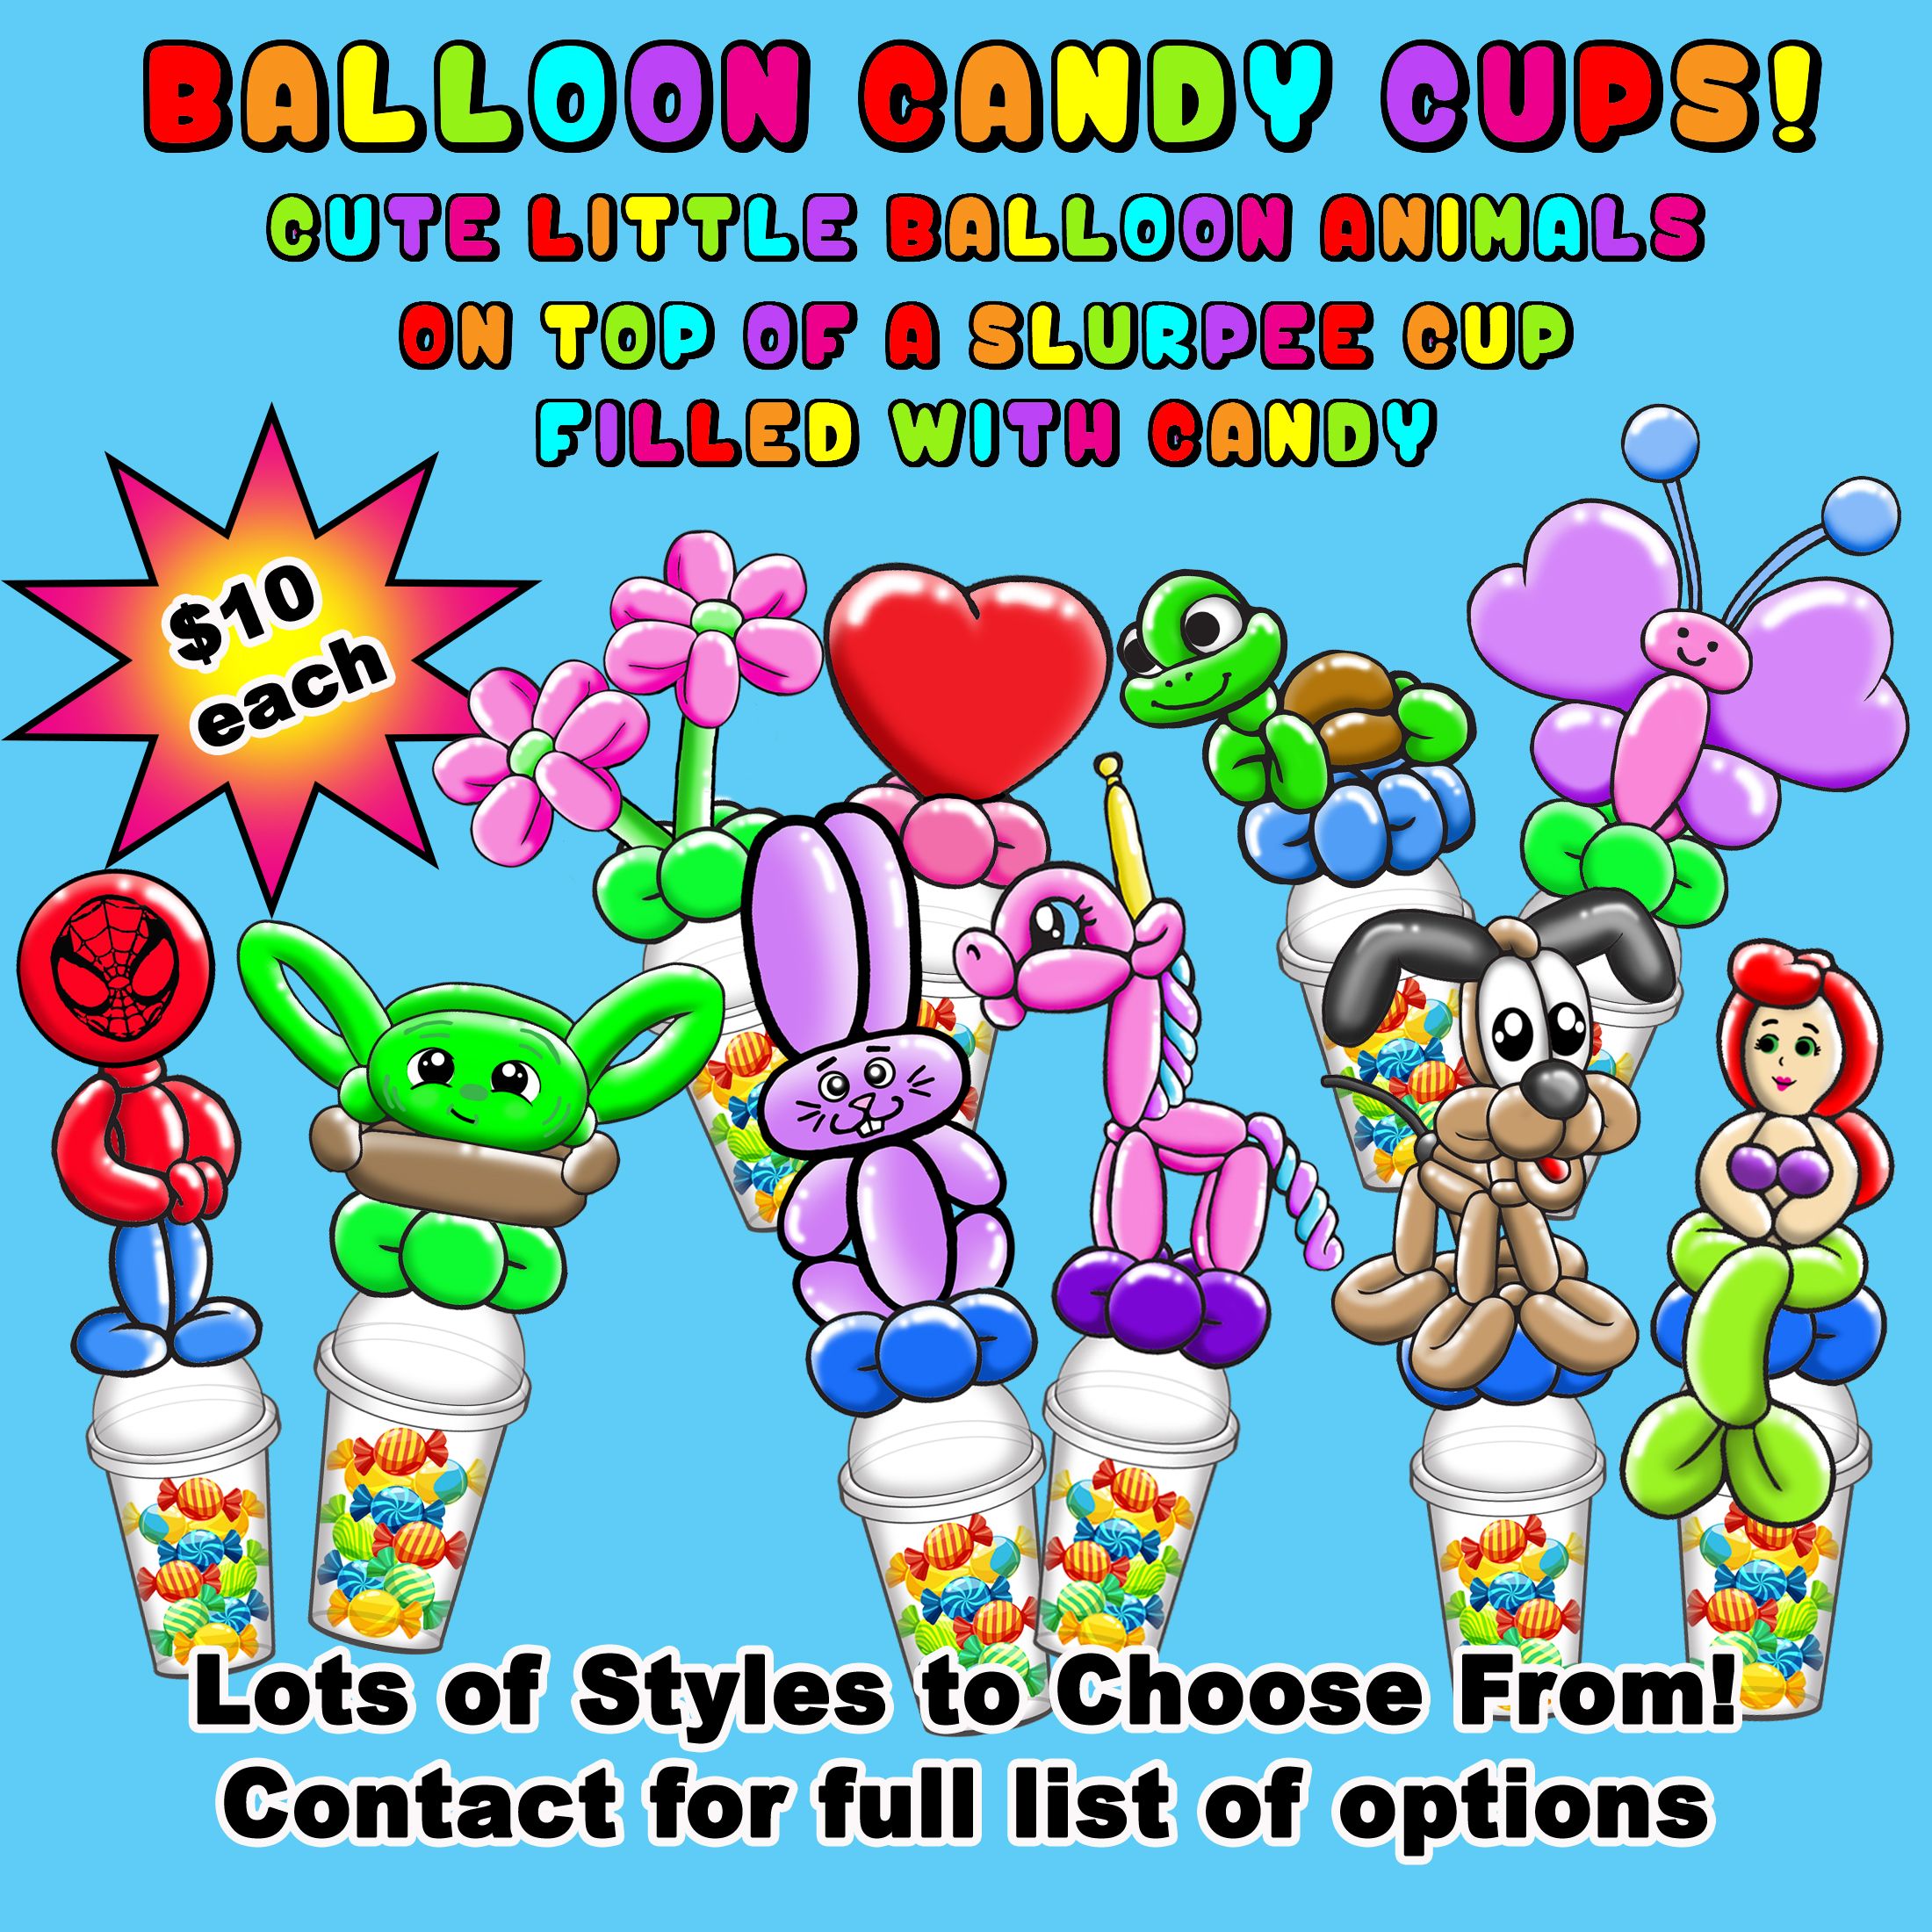 Valery candy cups promo for website.jpg